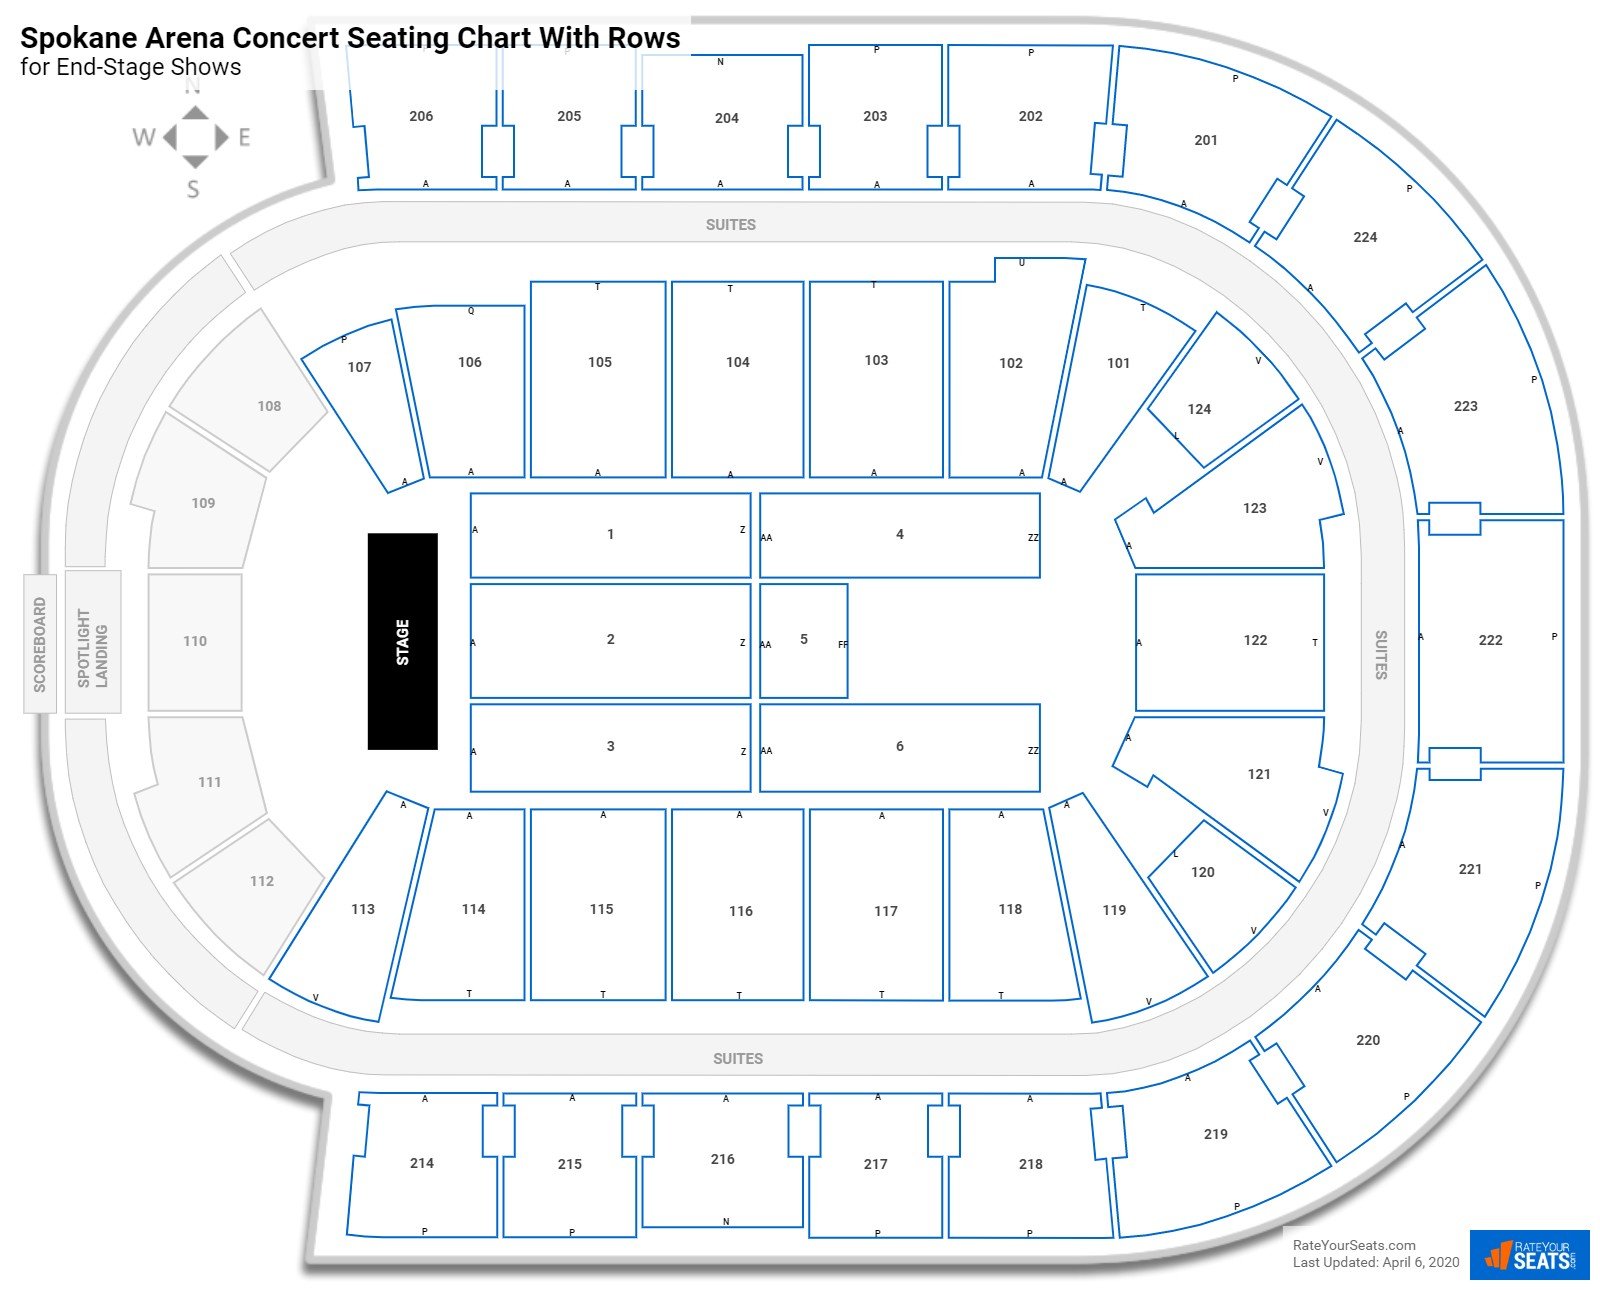 Spokane Arena Seating for Concerts